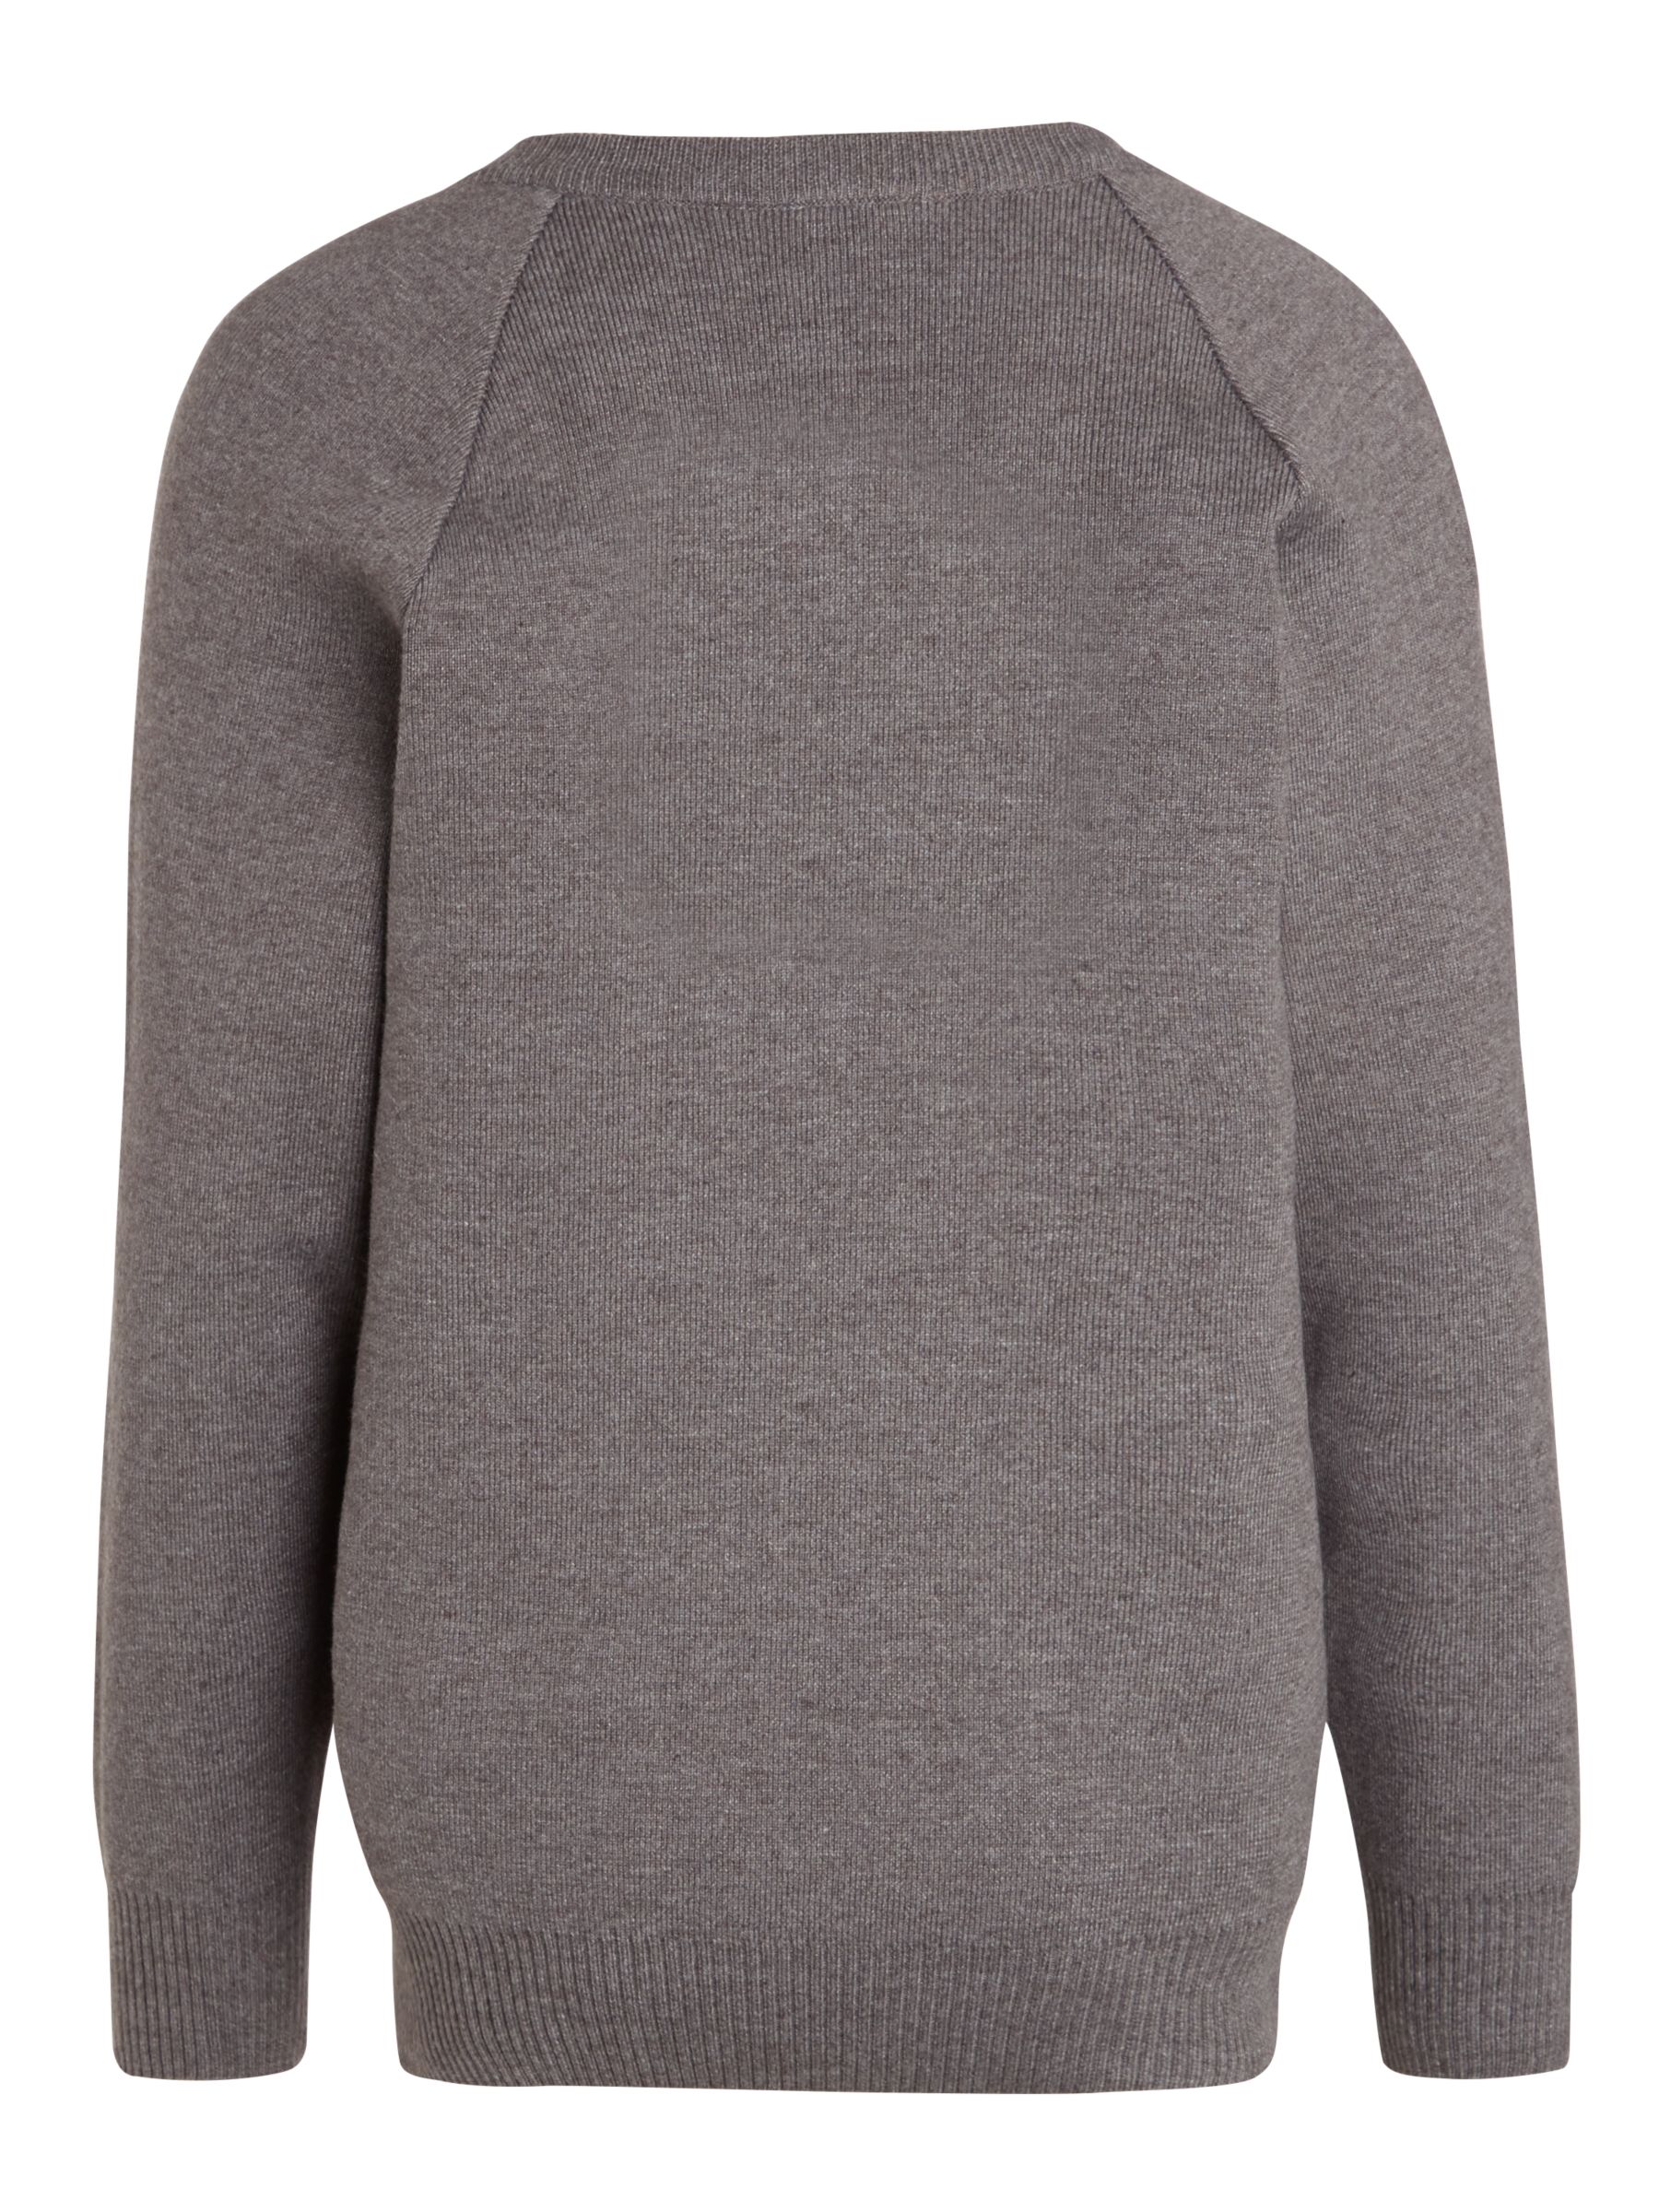 Fairley House School Pullover, Grey at John Lewis & Partners